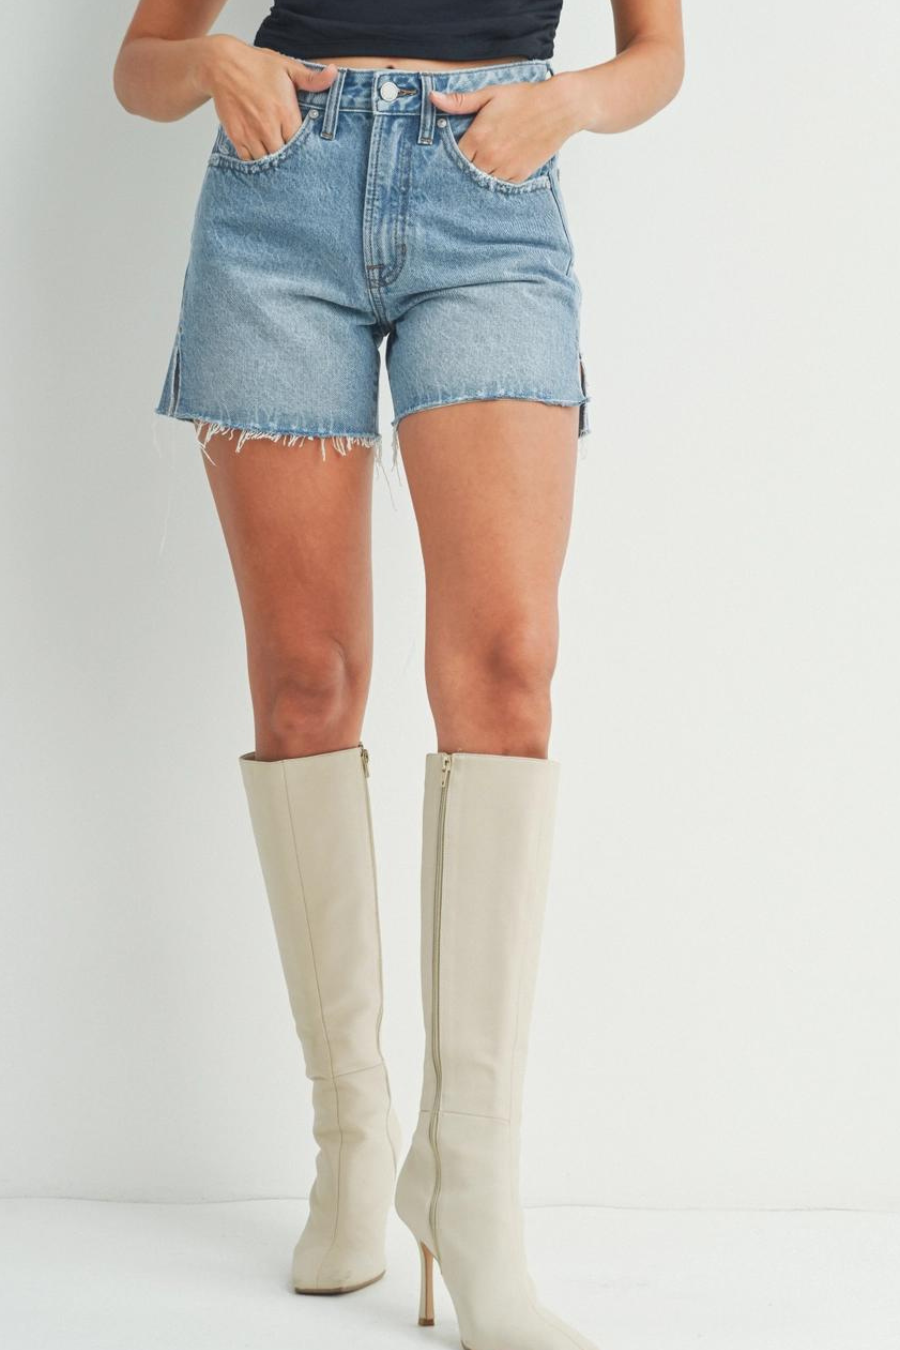 close of girl wearing denim shorts with slits on the side paired with white boots 